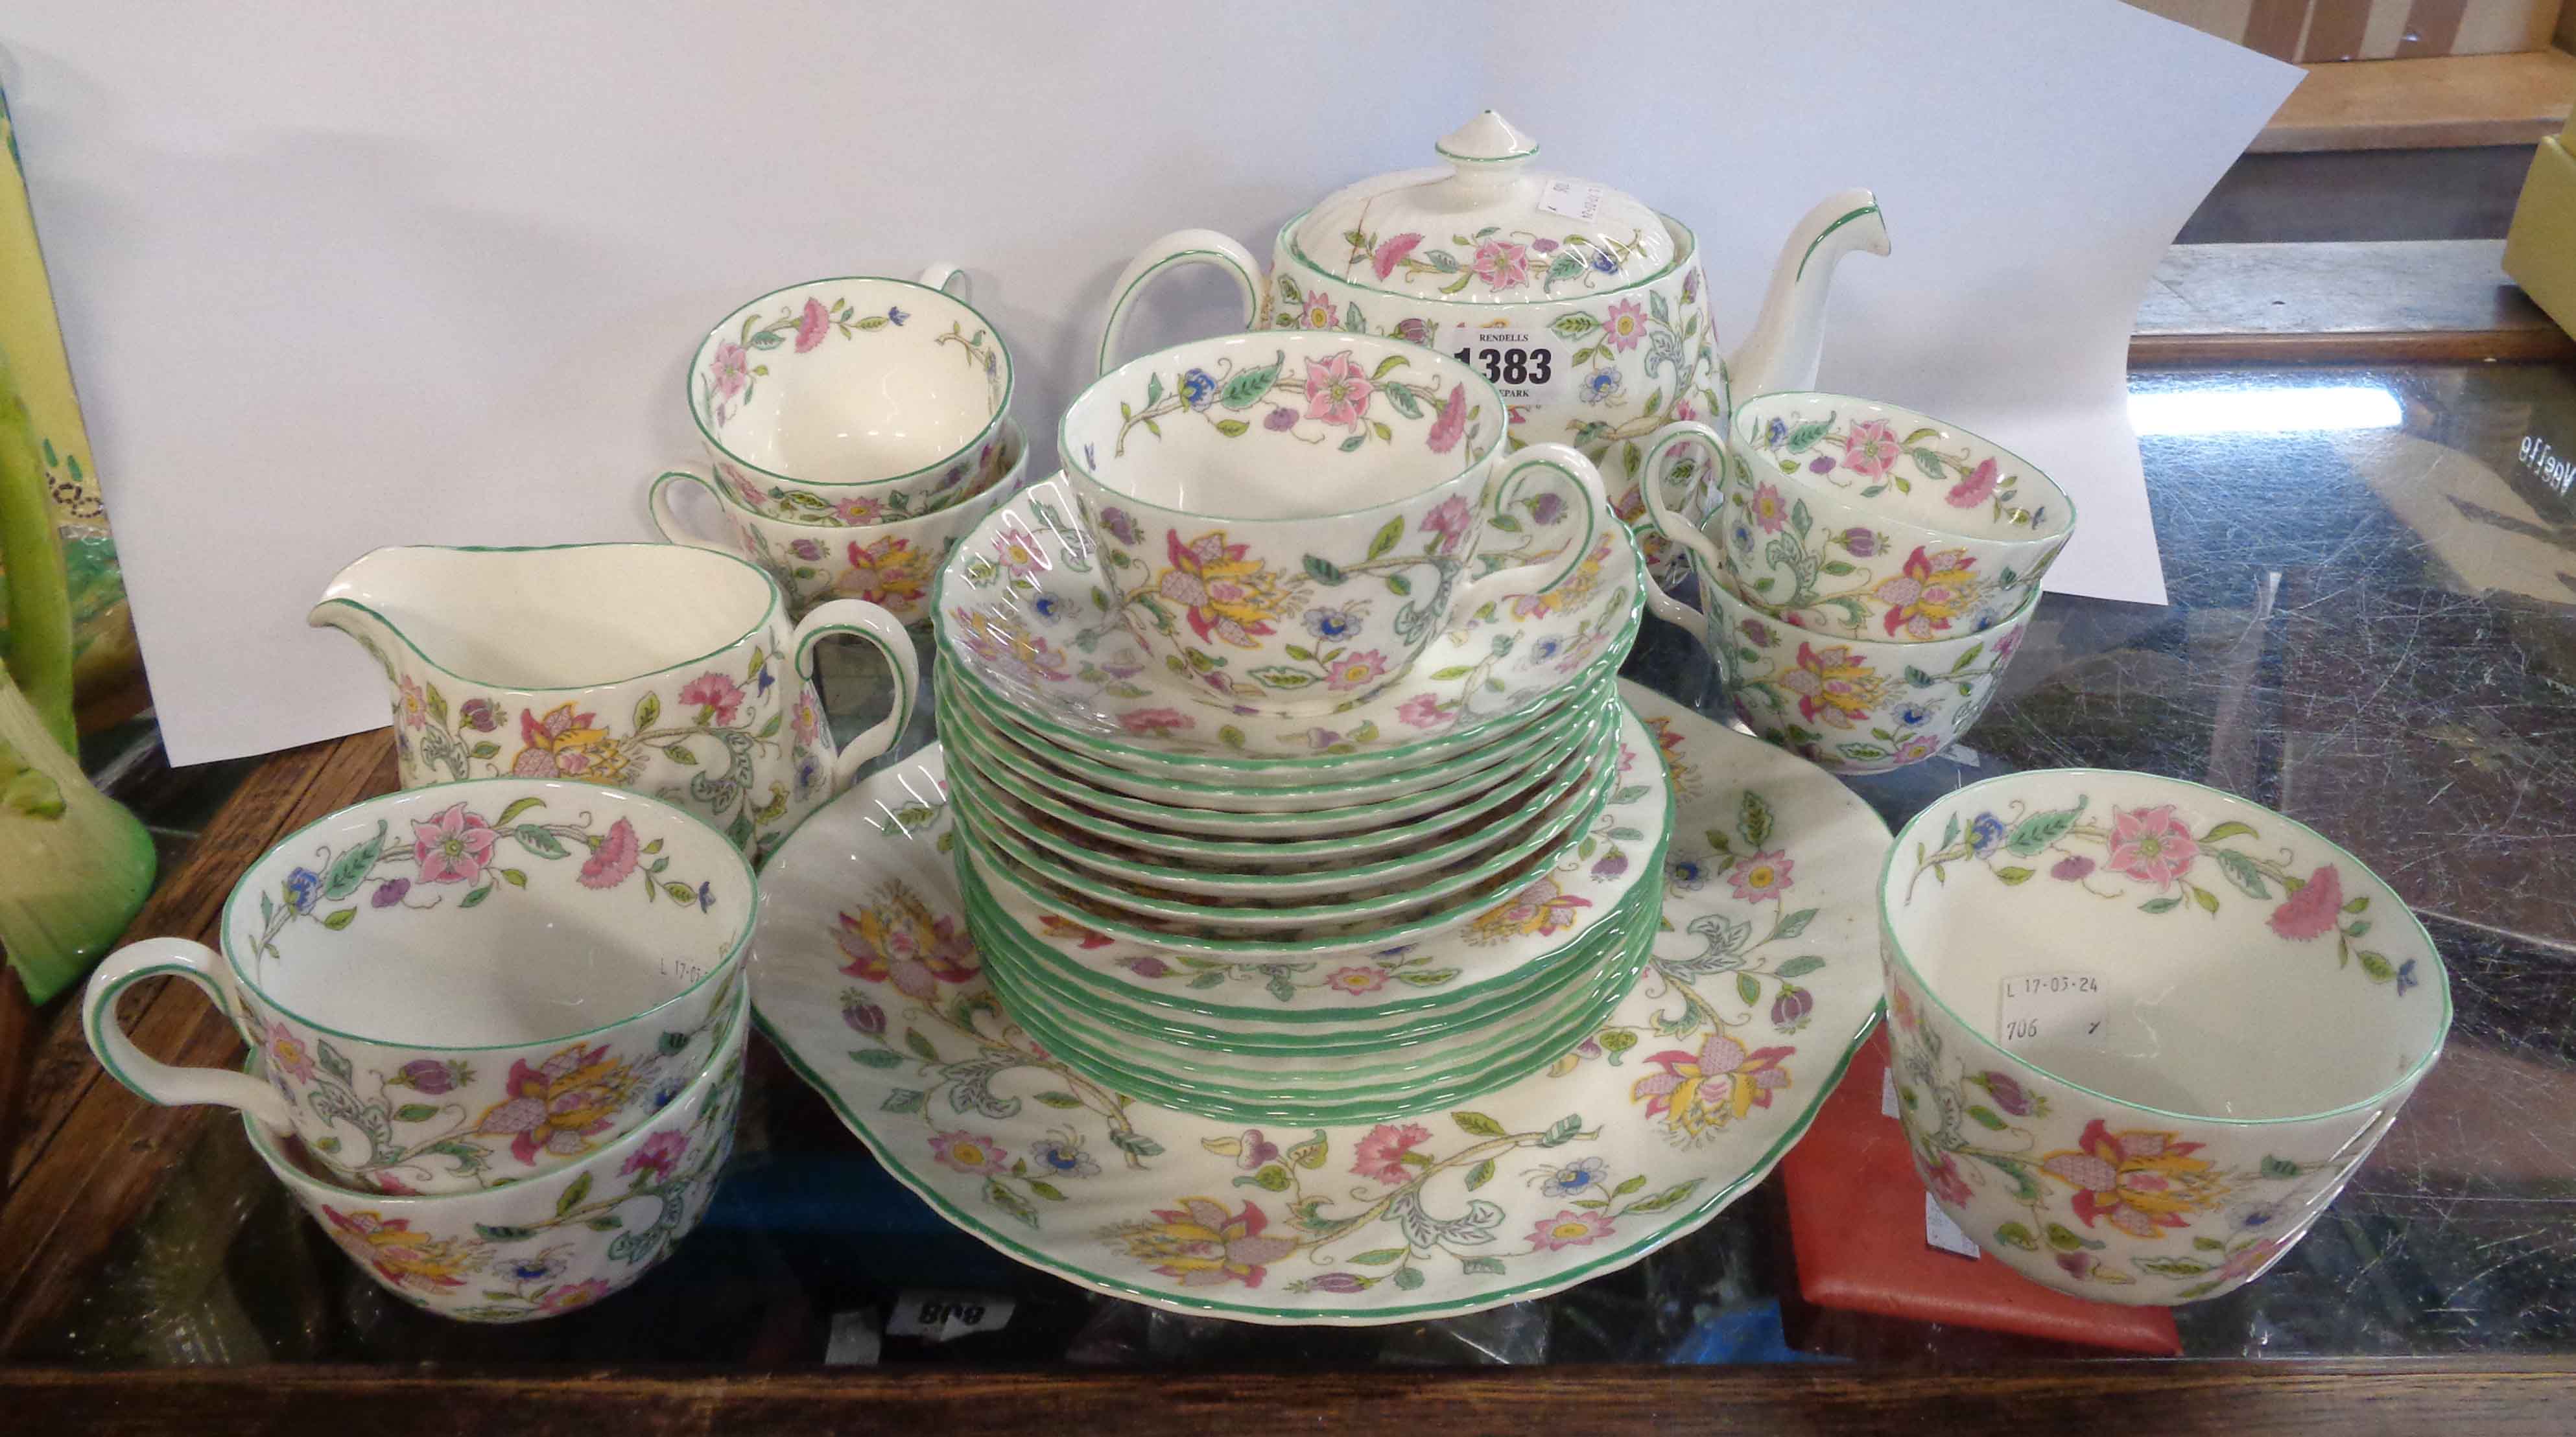 A quantity Mintons bone china teaware, decorated in the Haddon Hall pattern including teapot, (lid